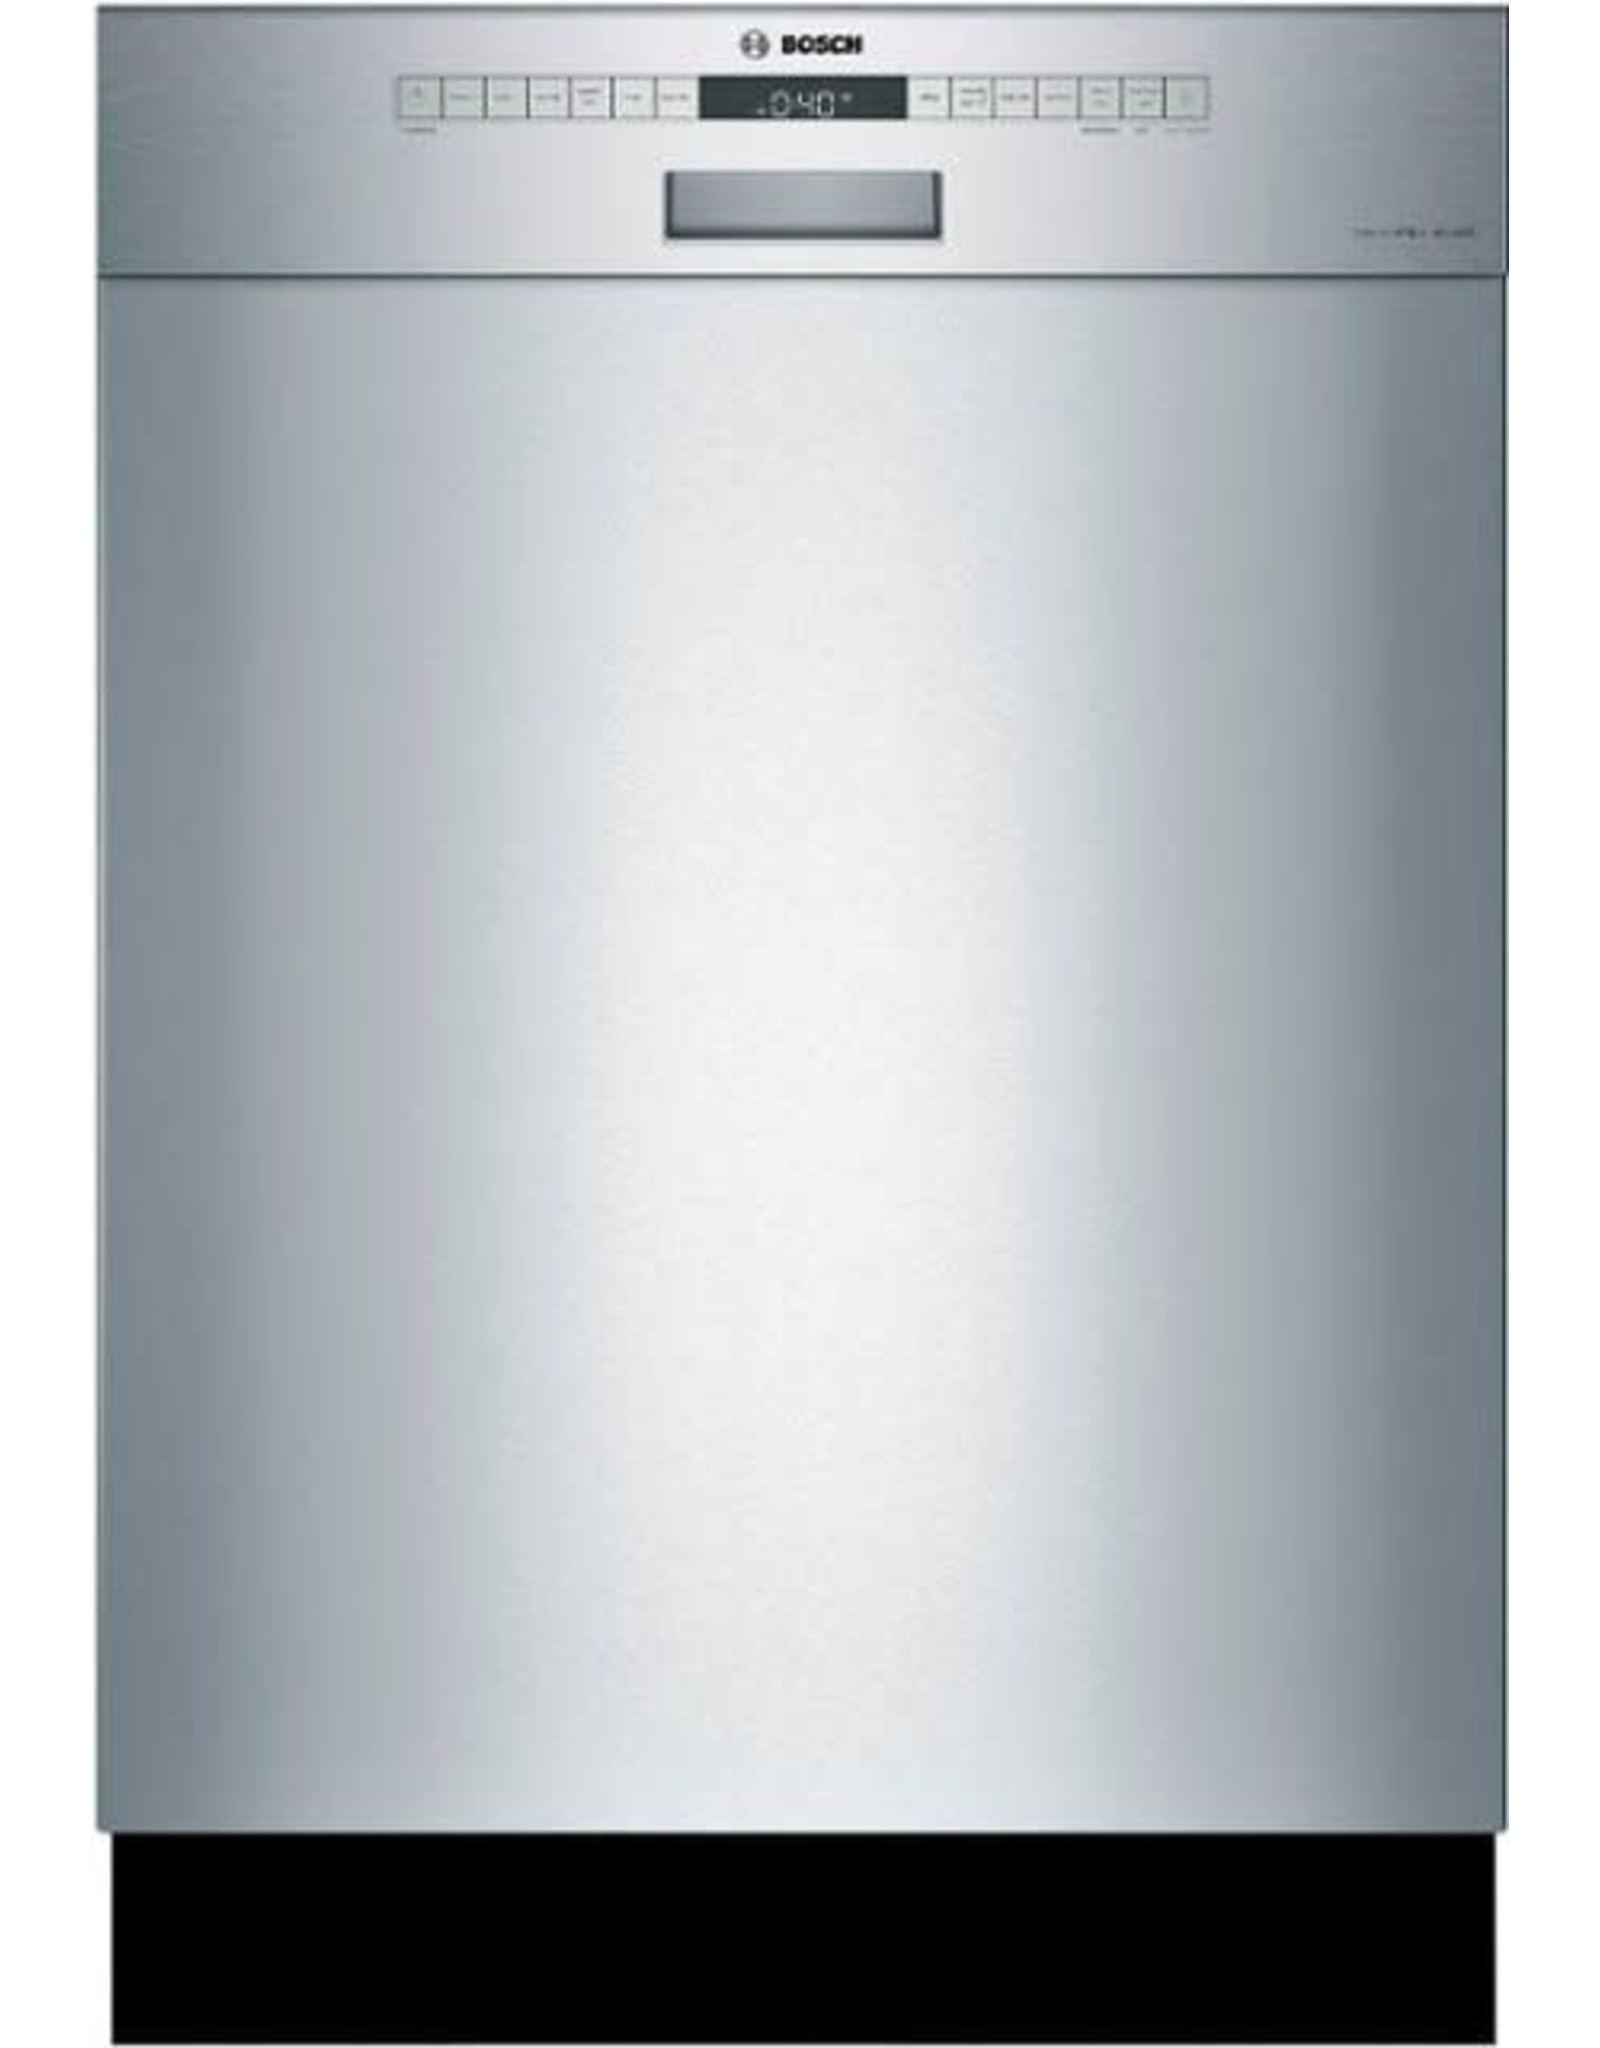 Bosch 300 Series Top Control 24-in Built-In Dishwasher (Stainless Steel) ENERGY STAR, 48-dBA